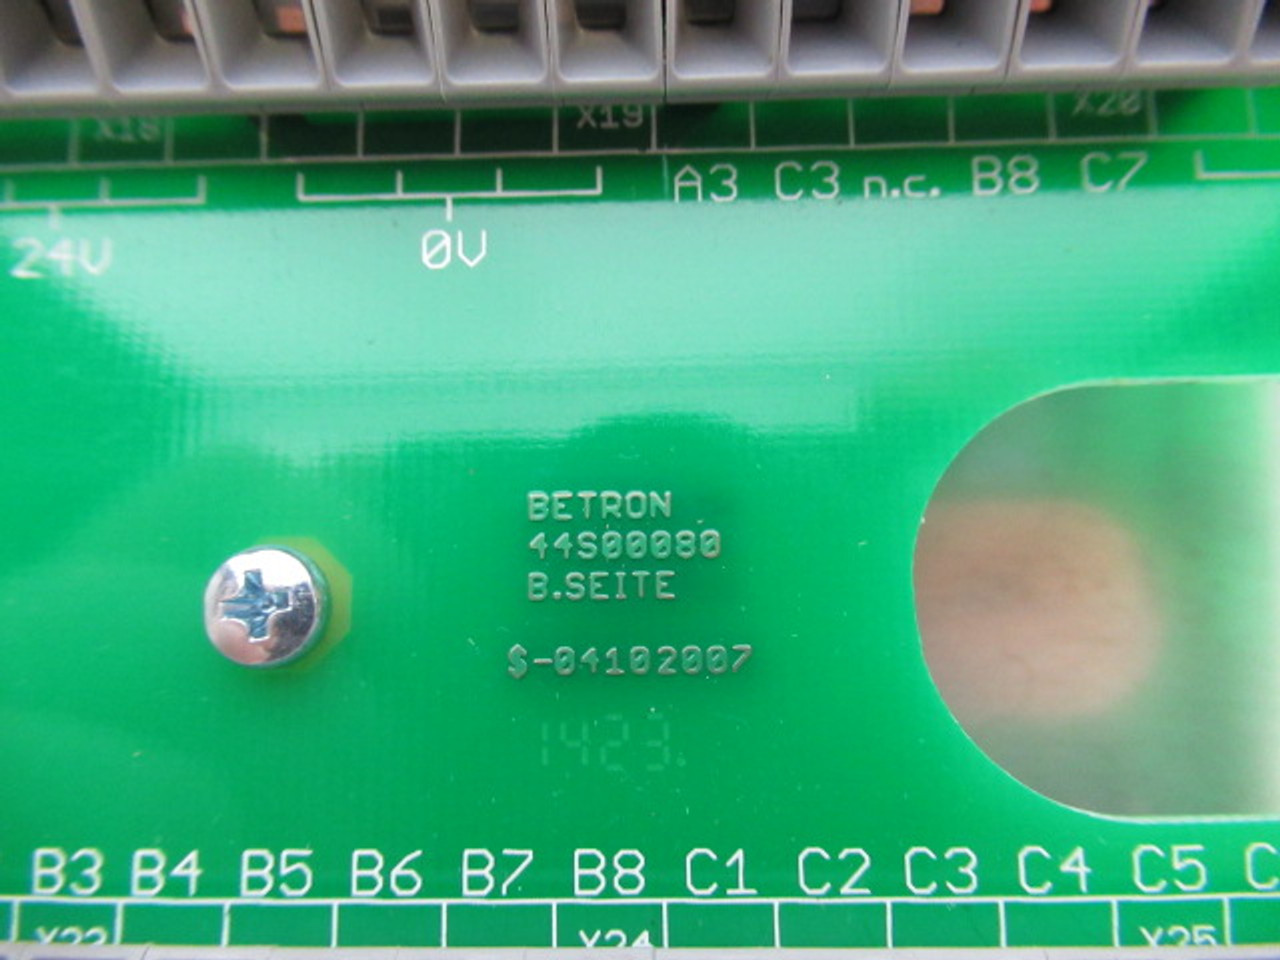 Betron 44S00000 Raised Connector Board USED